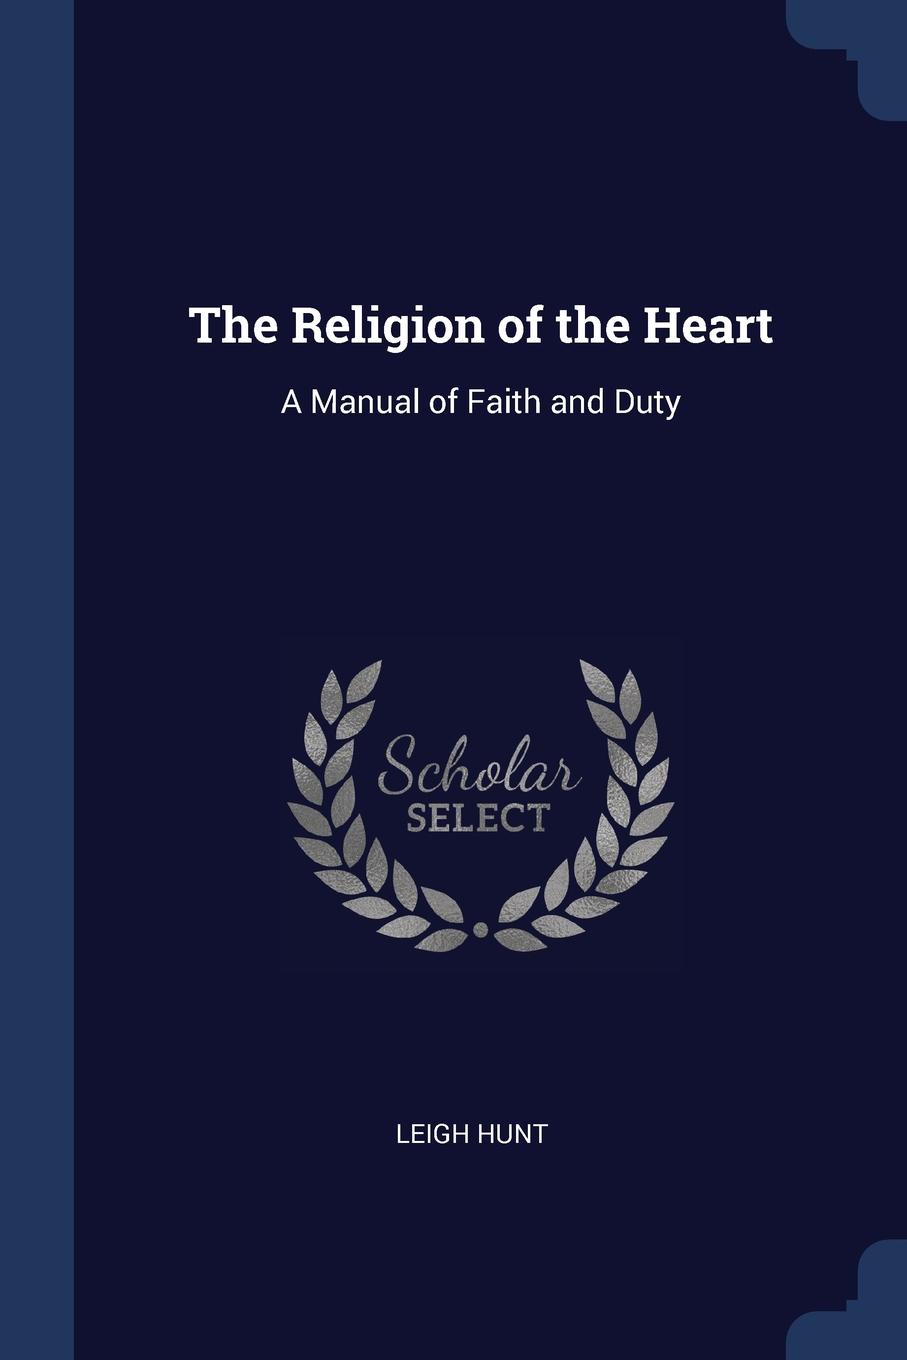 The Religion of the Heart. A Manual of Faith and Duty